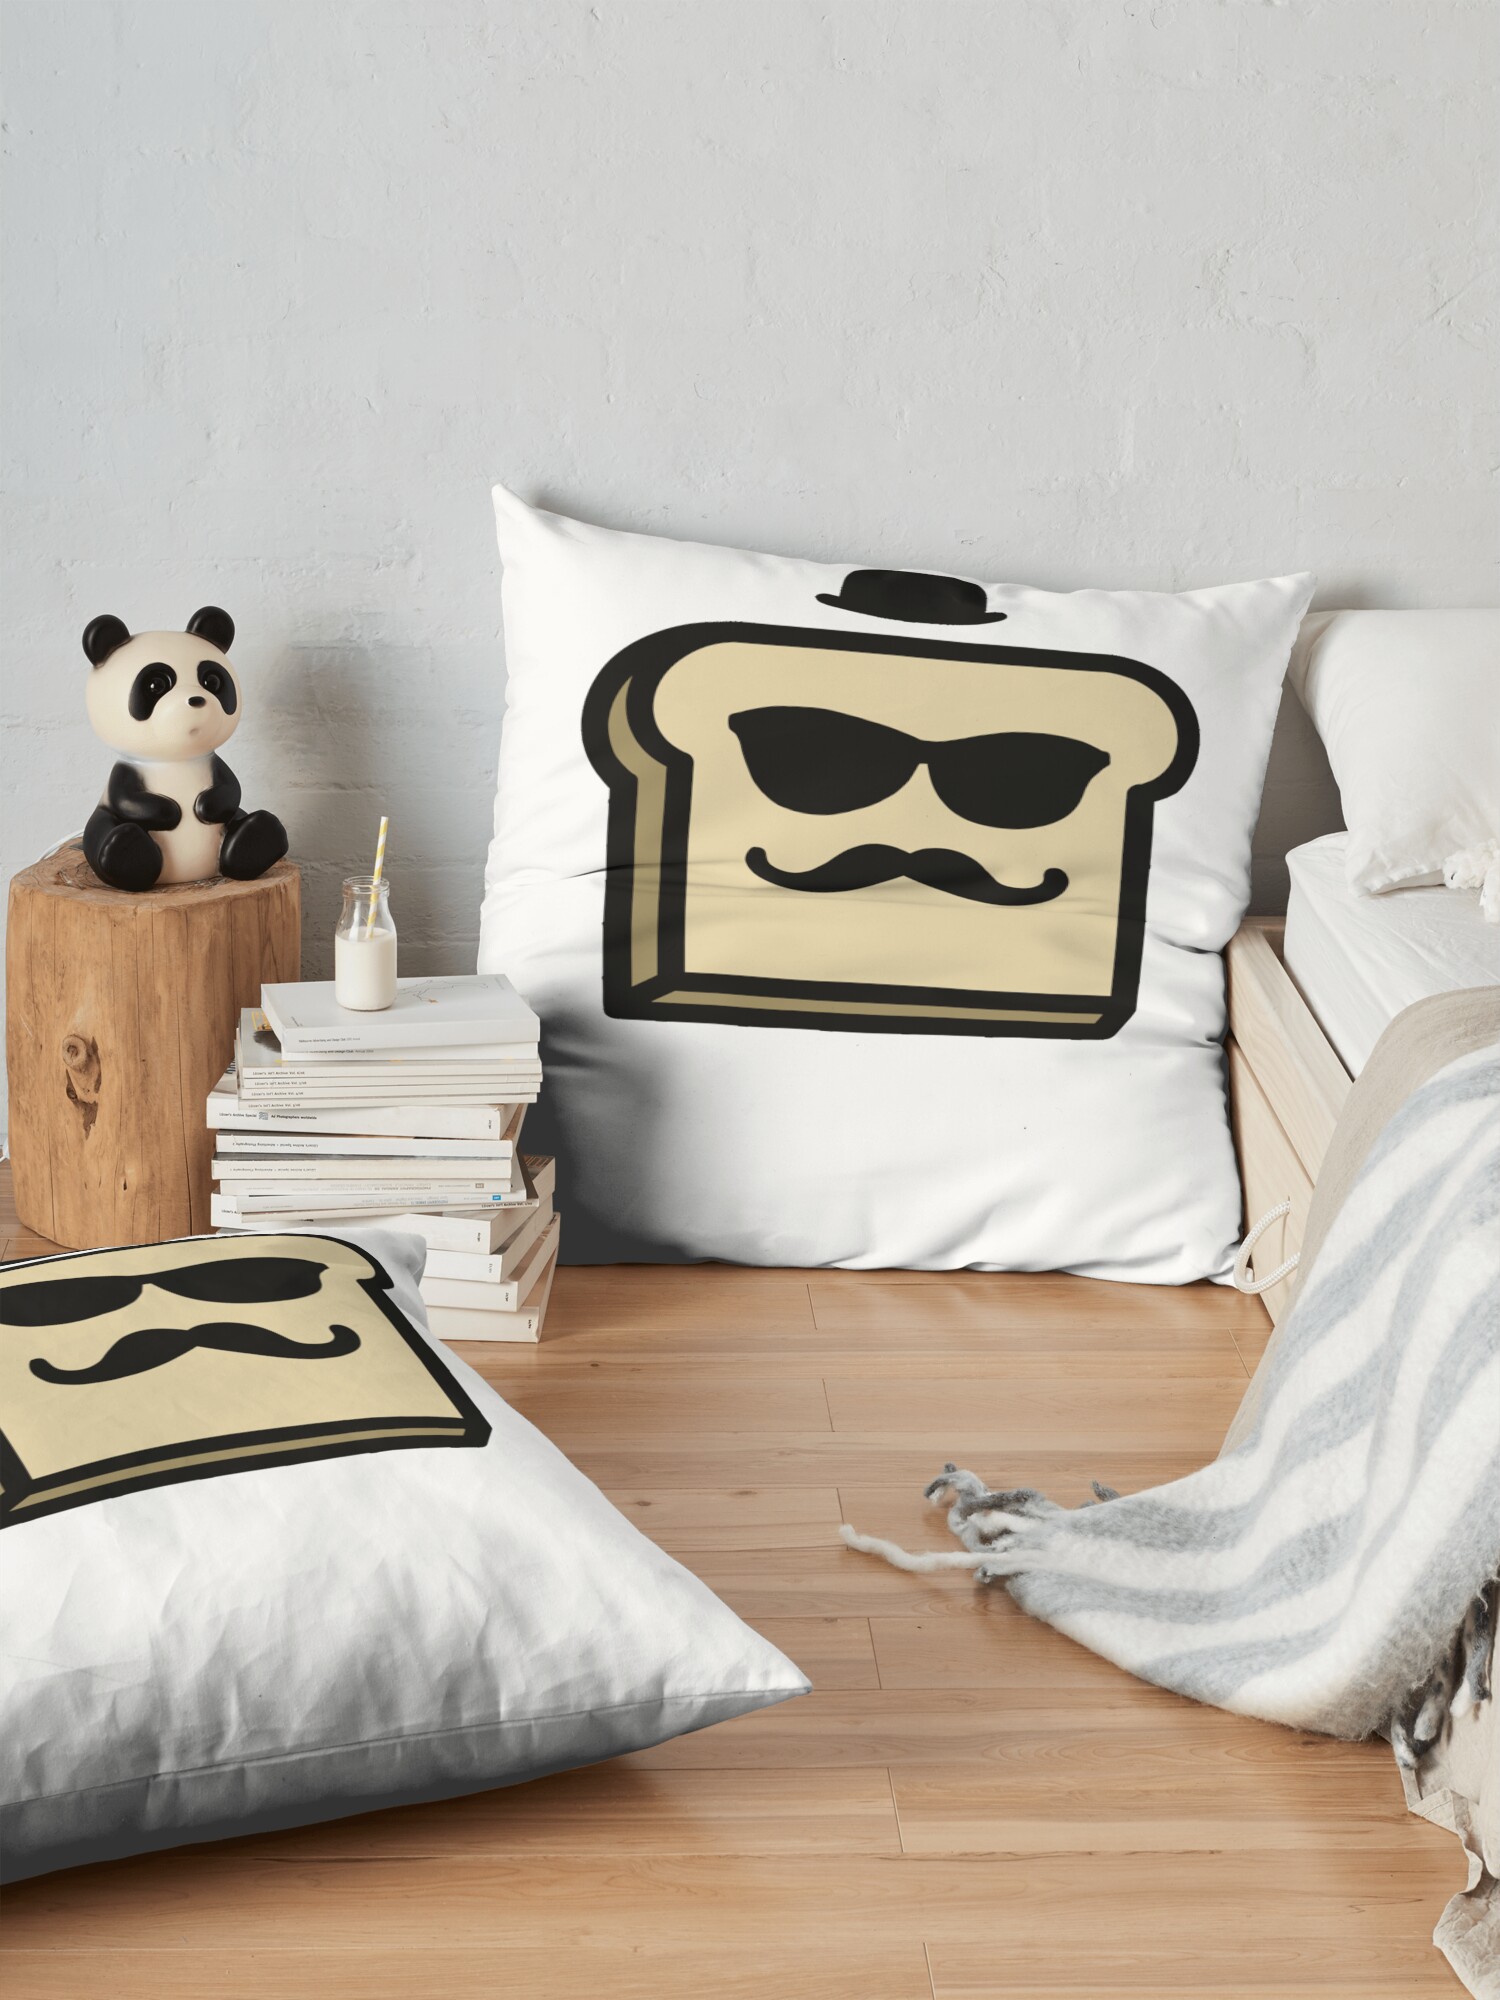 throwpillowsecondary 36x362000x2000 bgf8f8f8 6 - Disguised Toast Shop